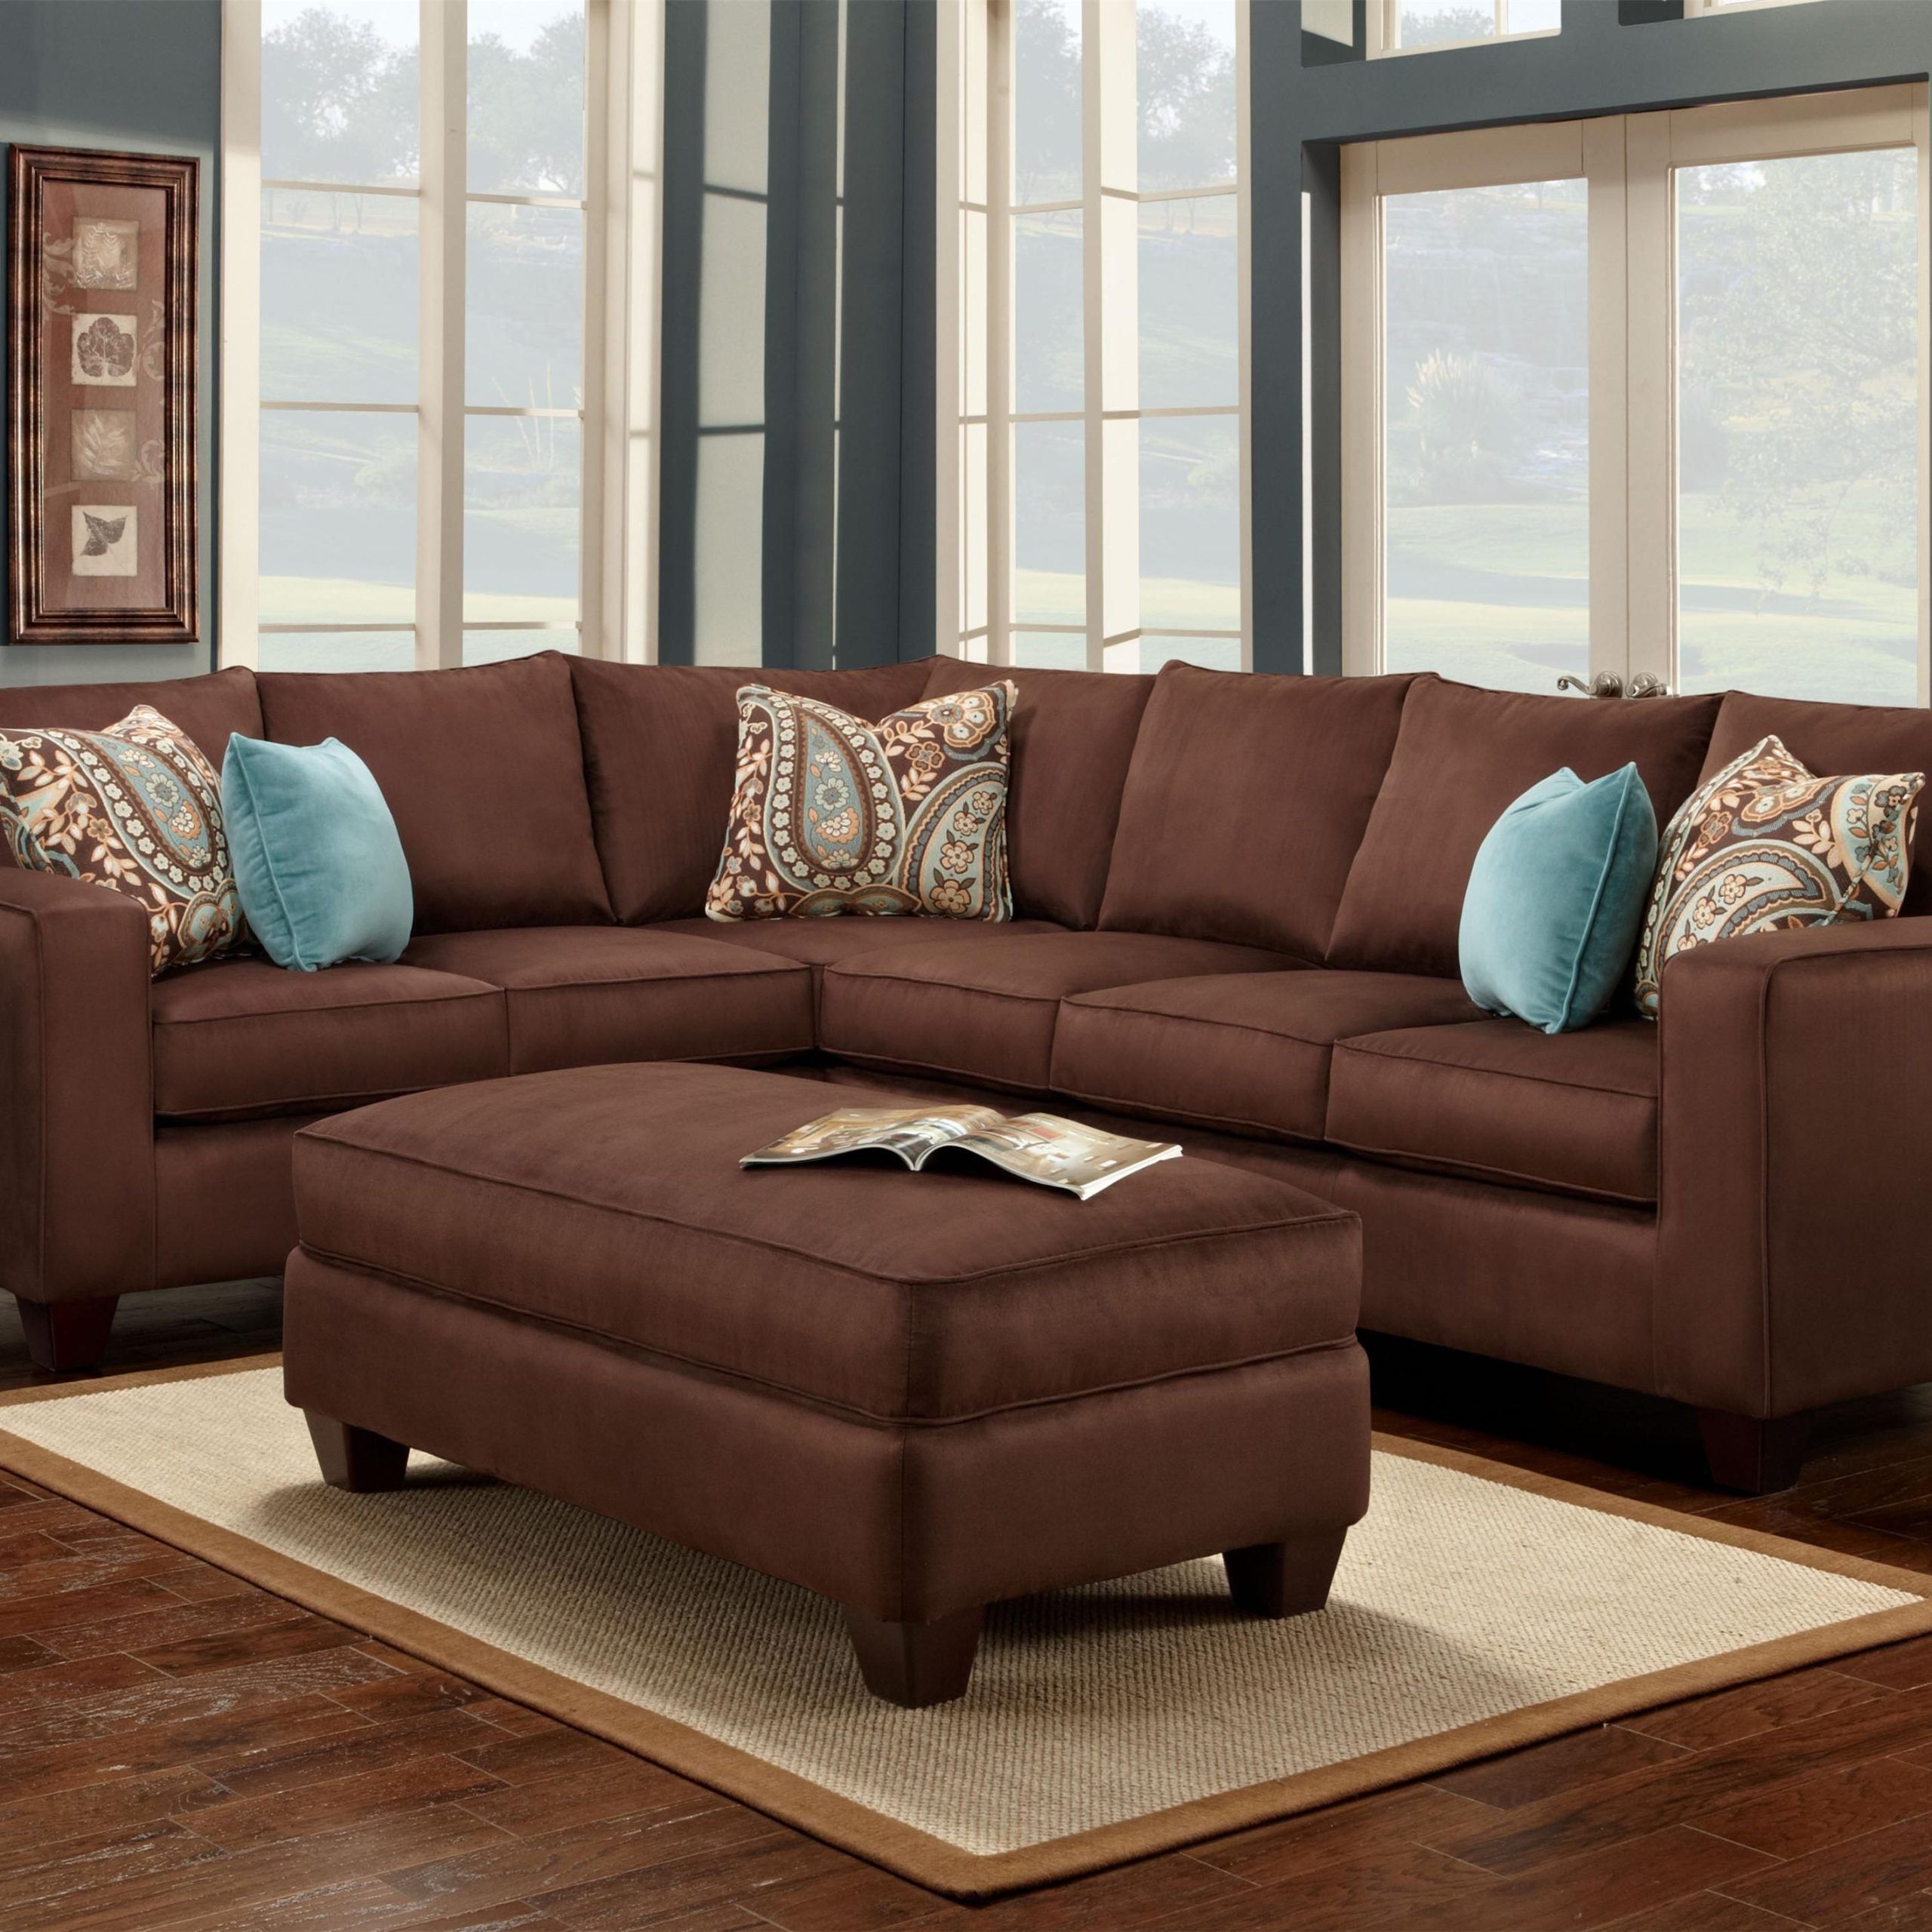 Featured Photo of Top 15 of Sofas in Chocolate Brown